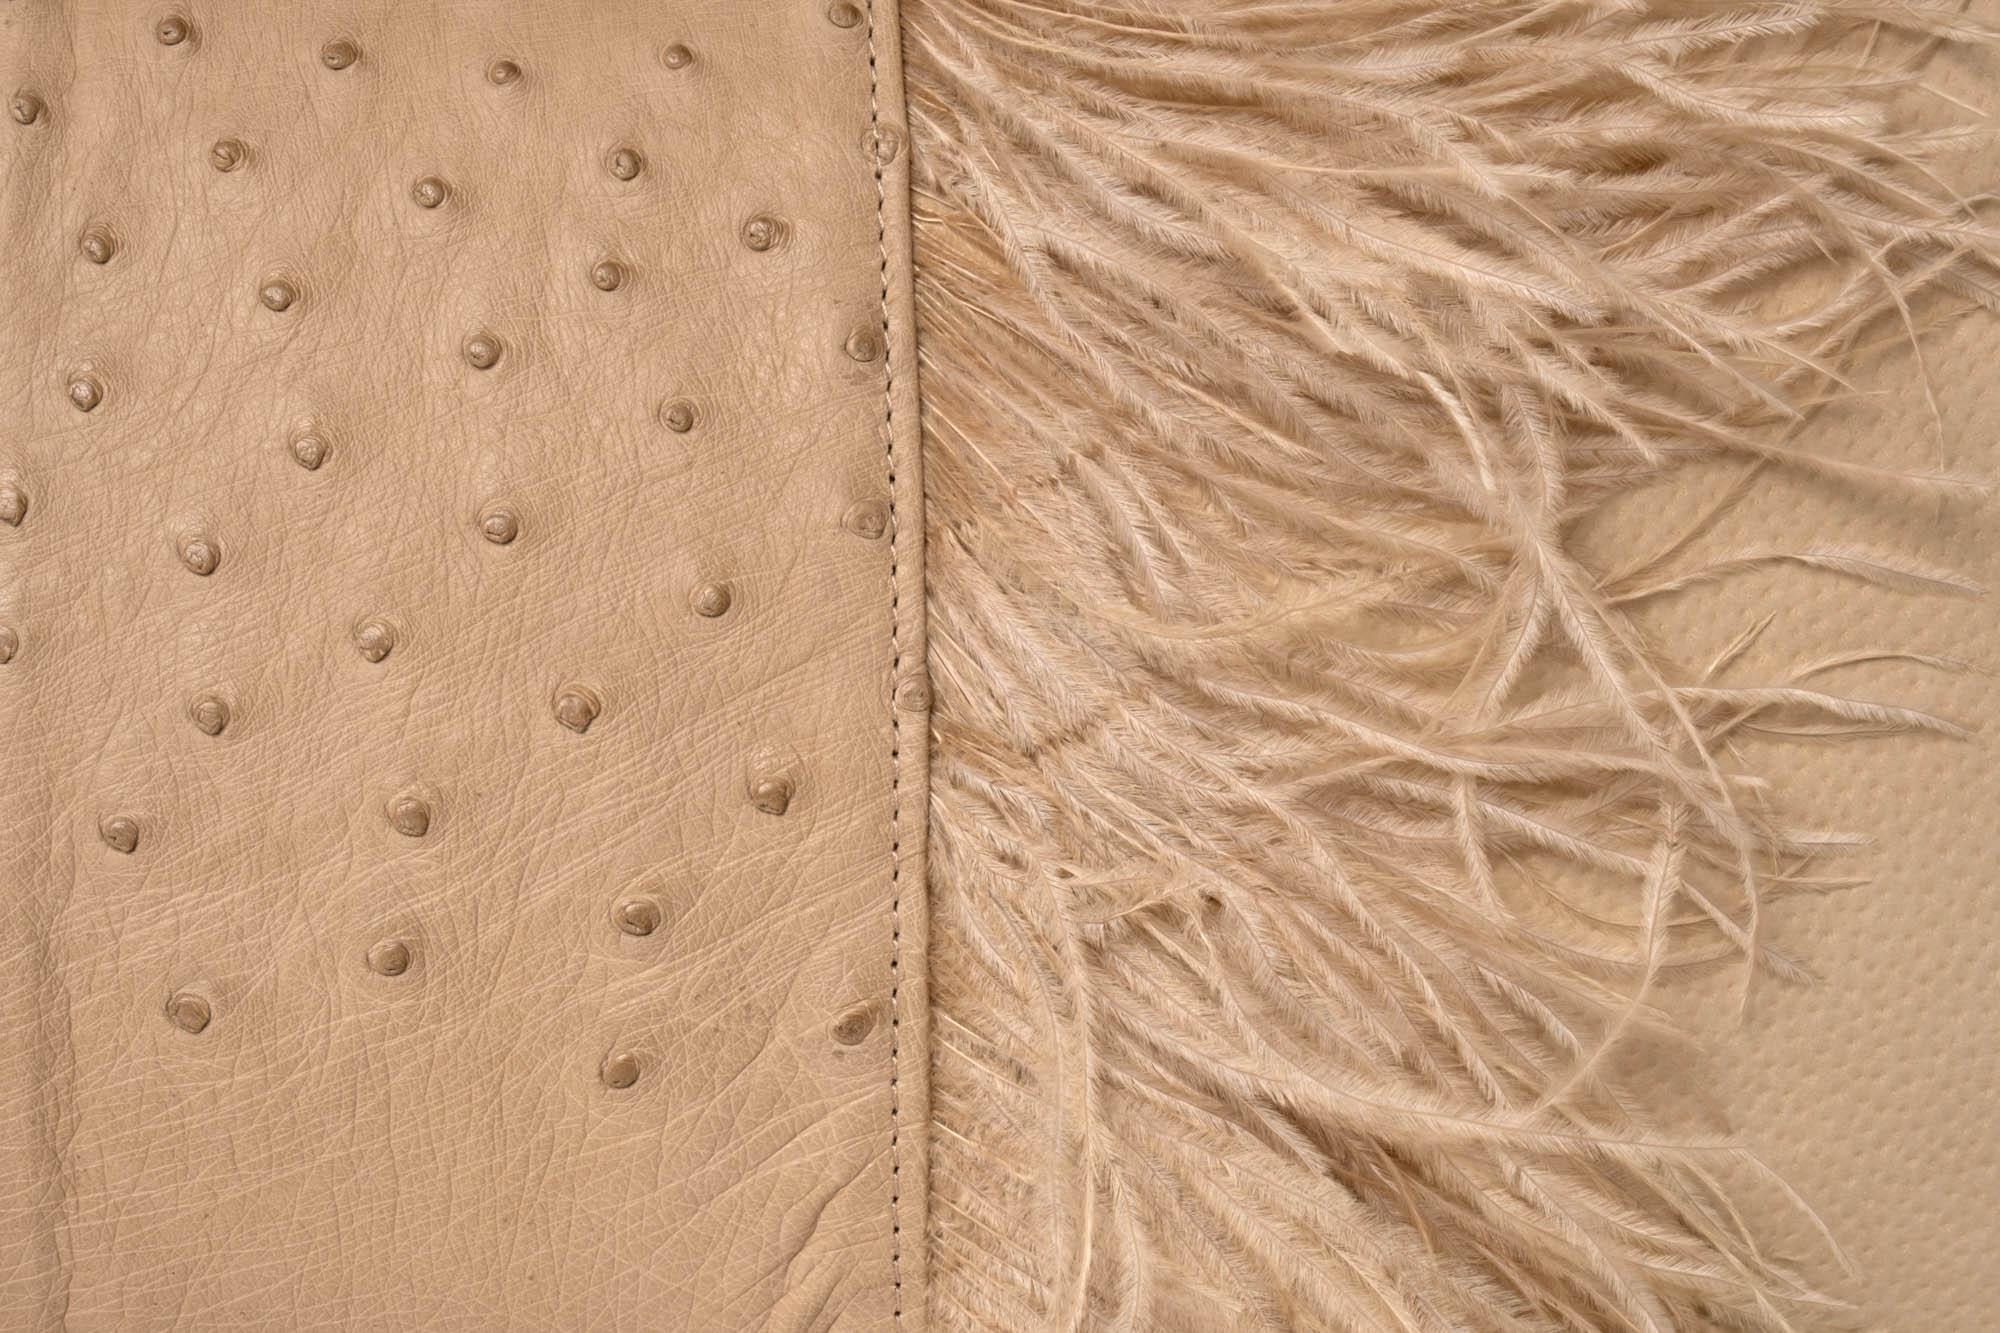 Ostrich Leather Inset Pillow with Feather Trim on Suede - Cream